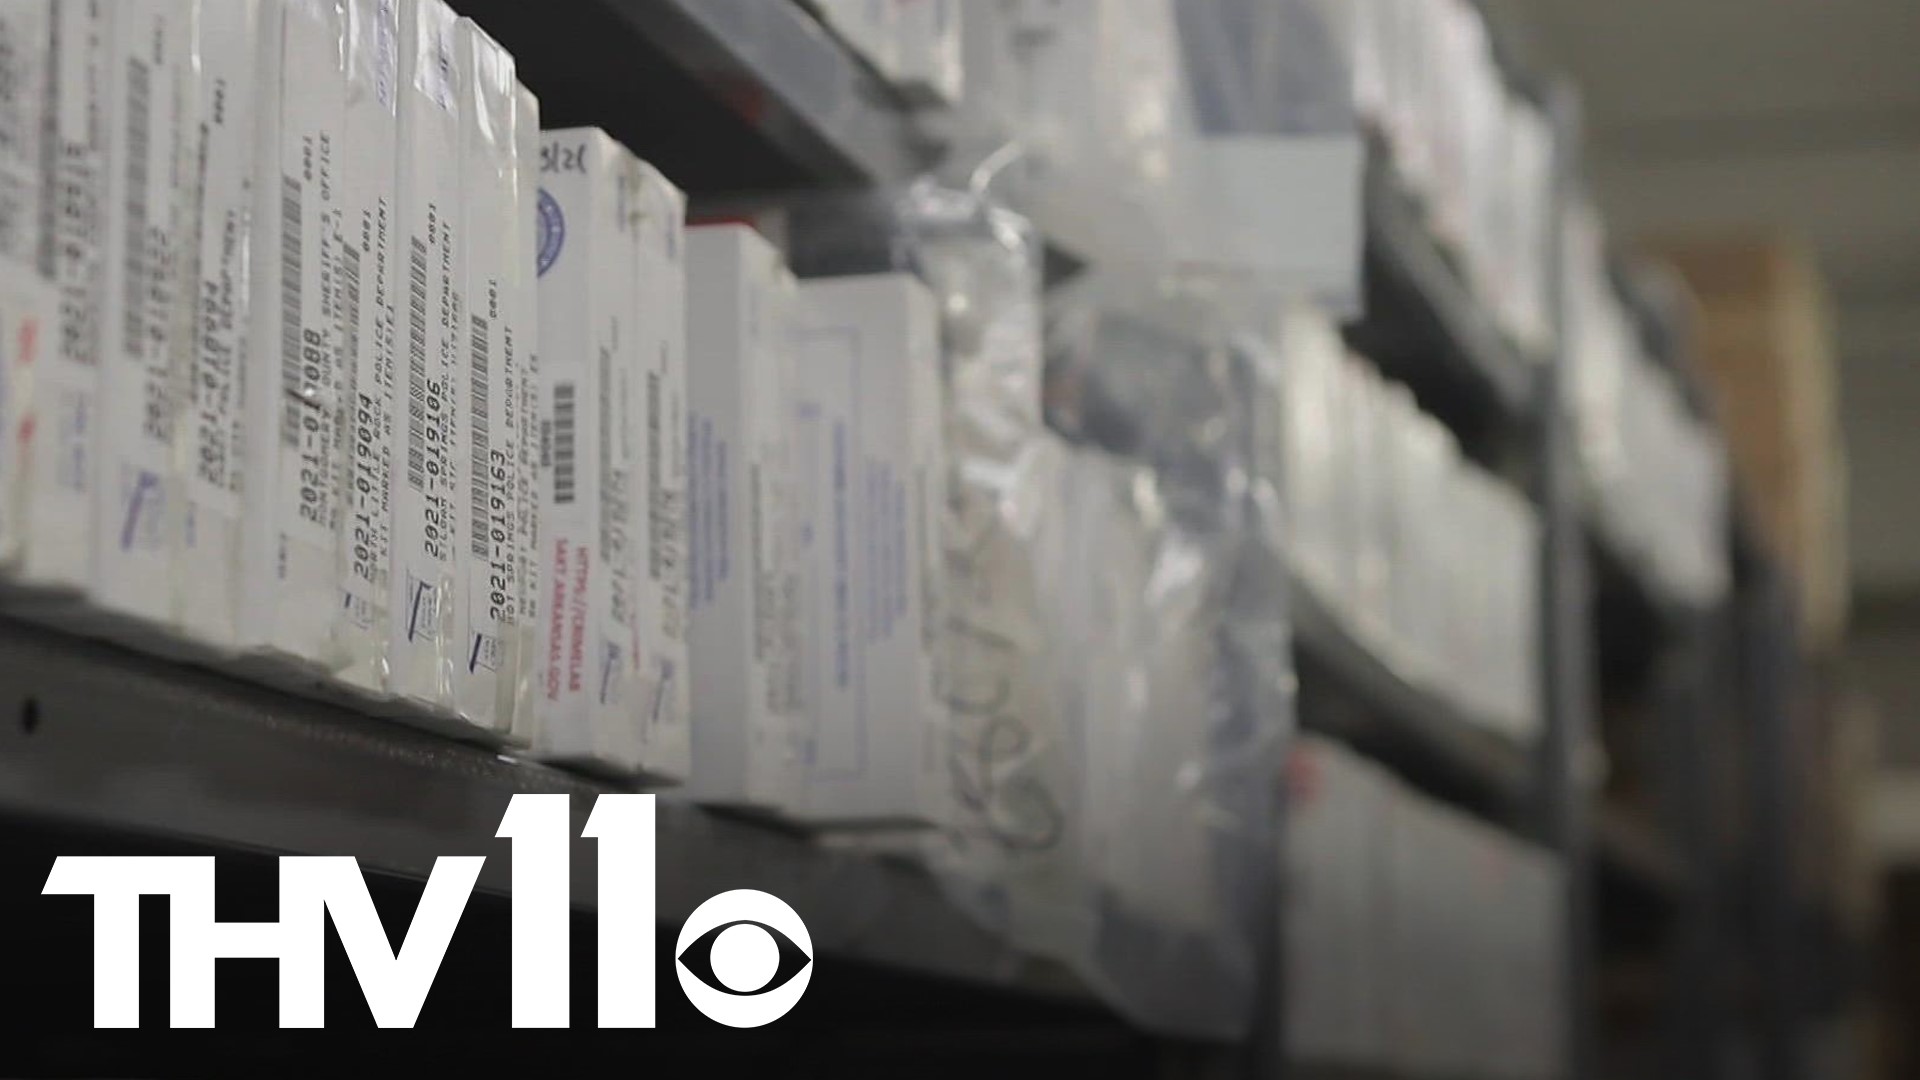 Despite Arkansas's efforts to clear a growing backlog of sexual assault test kits, thousands of kits have still been sitting on shelves inside the crime lab.